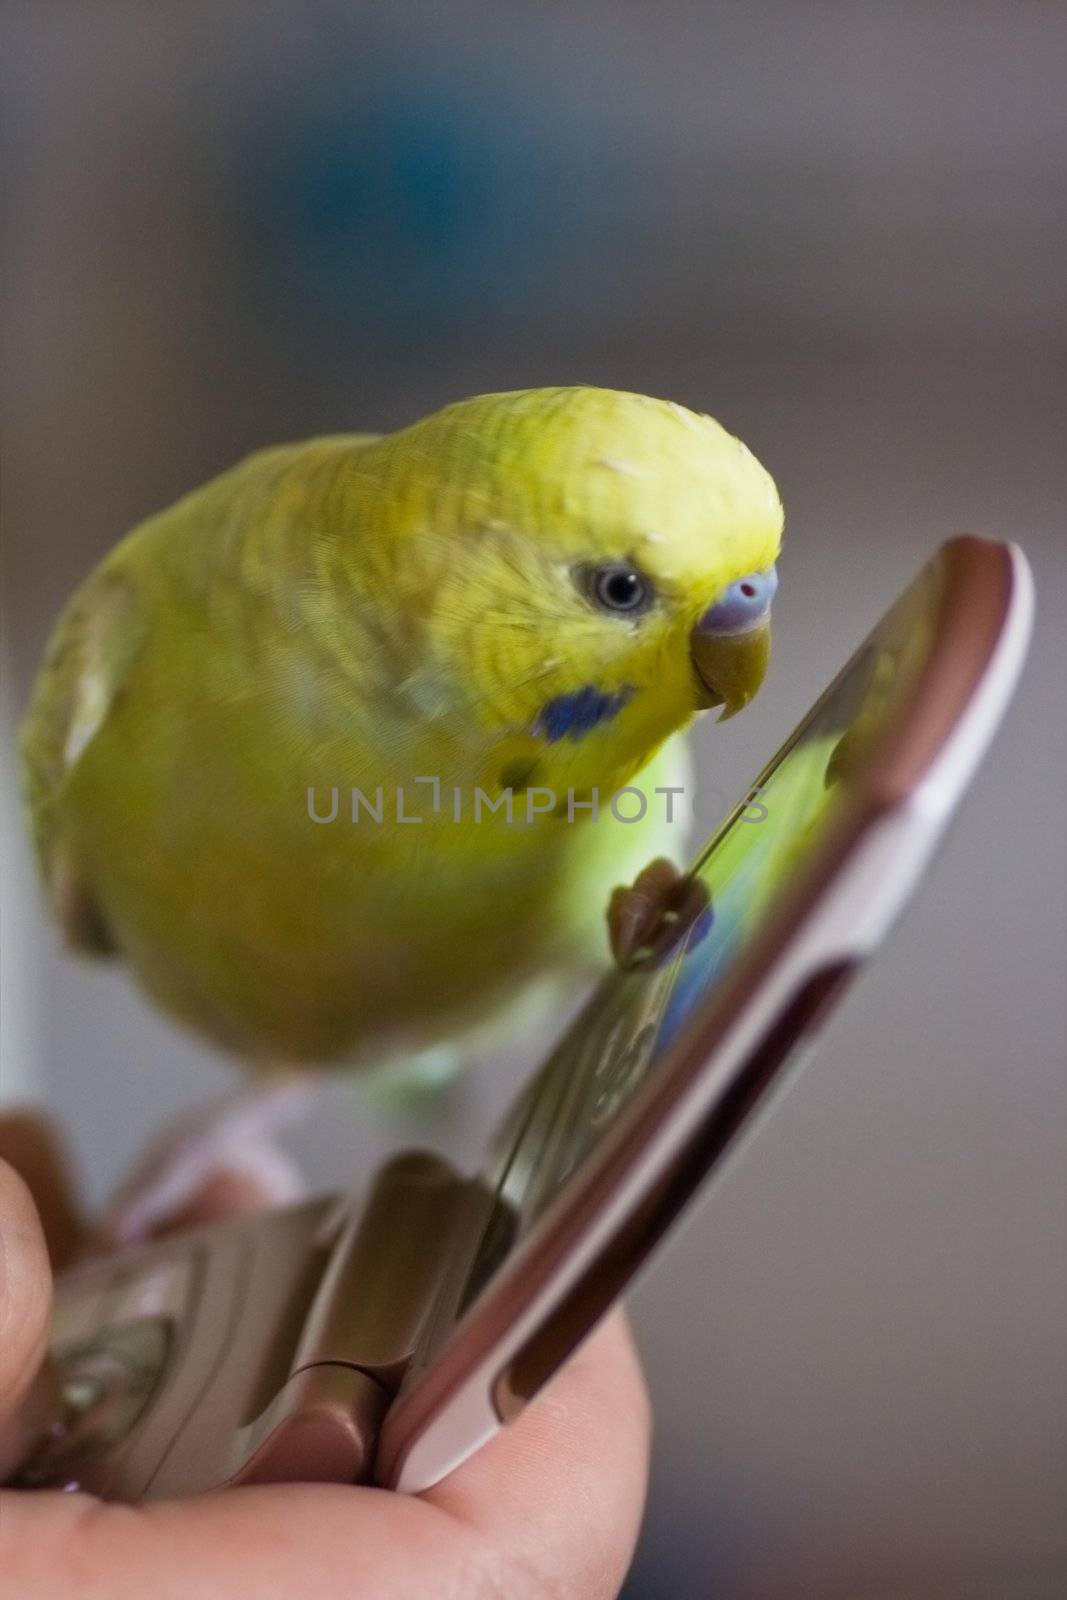 Small parakeet sitting on cellphone listening to the sound